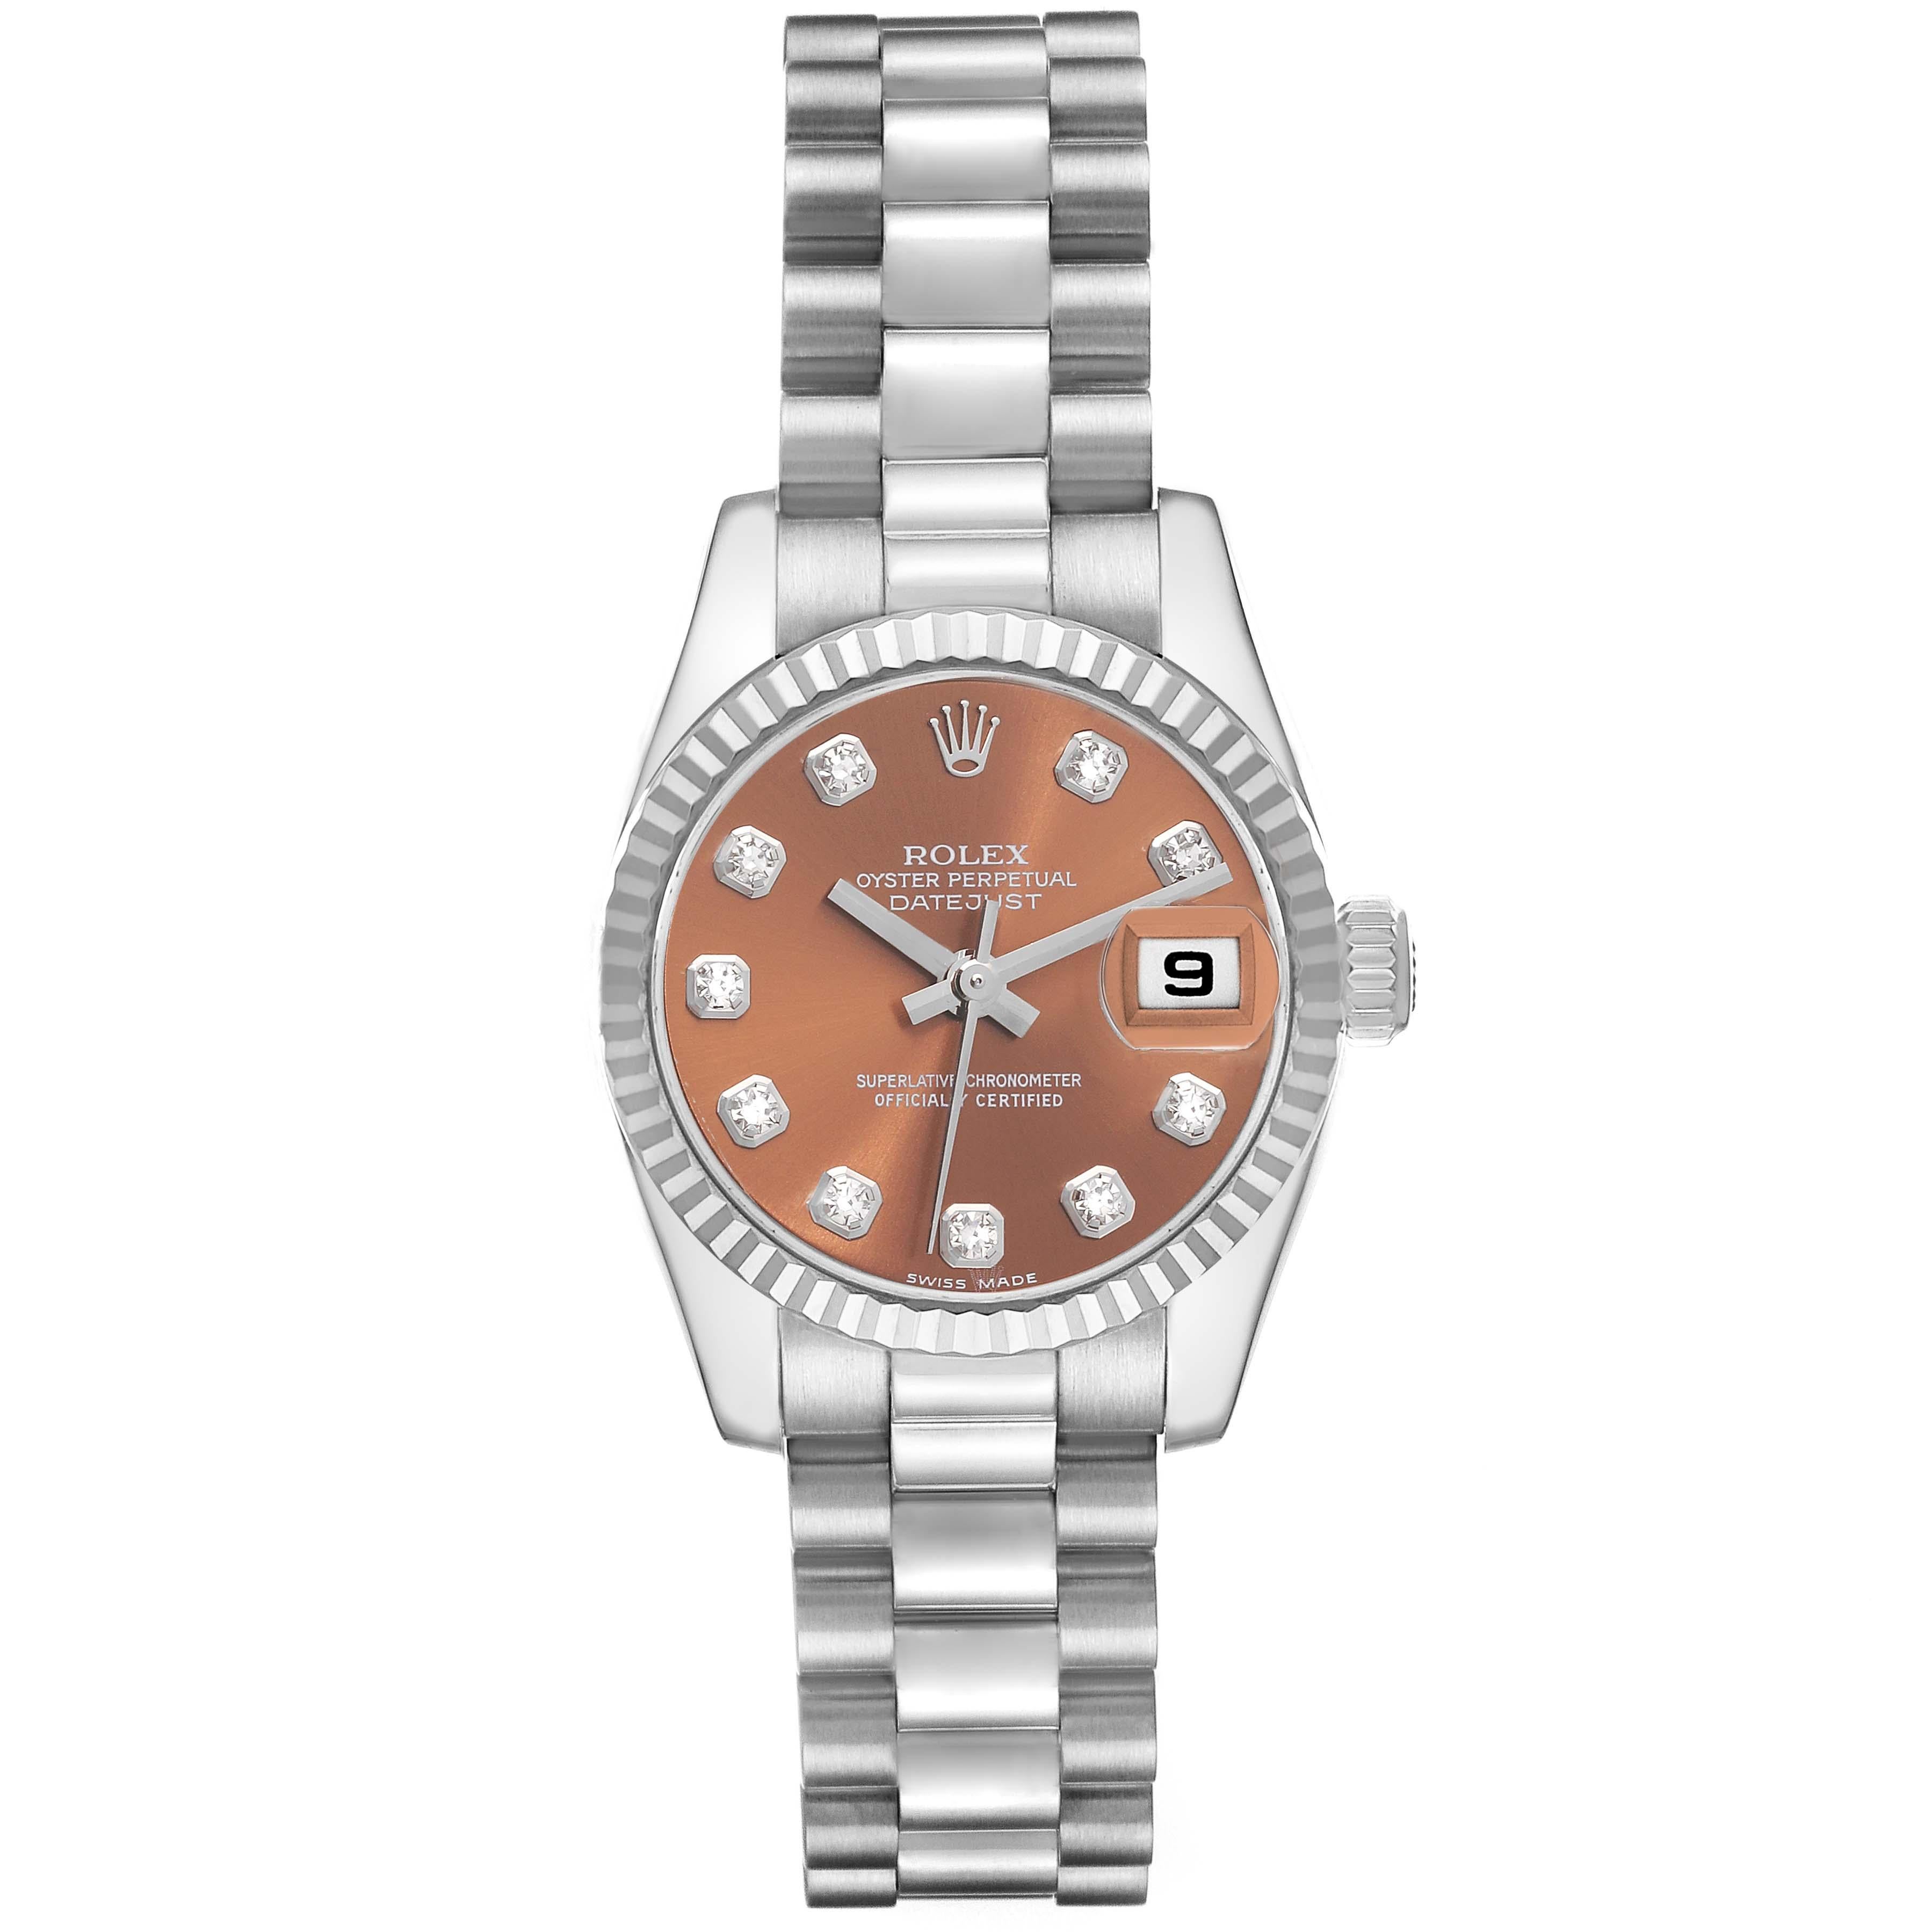 Rolex Datejust President White Gold Diamond Ladies Watch 179179 Box Papers. Officially certified chronometer self-winding movement. 18k white gold oyster case 26.0 mm in diameter. Rolex logo on a crown. 18k white gold fluted bezel. Scratch resistant